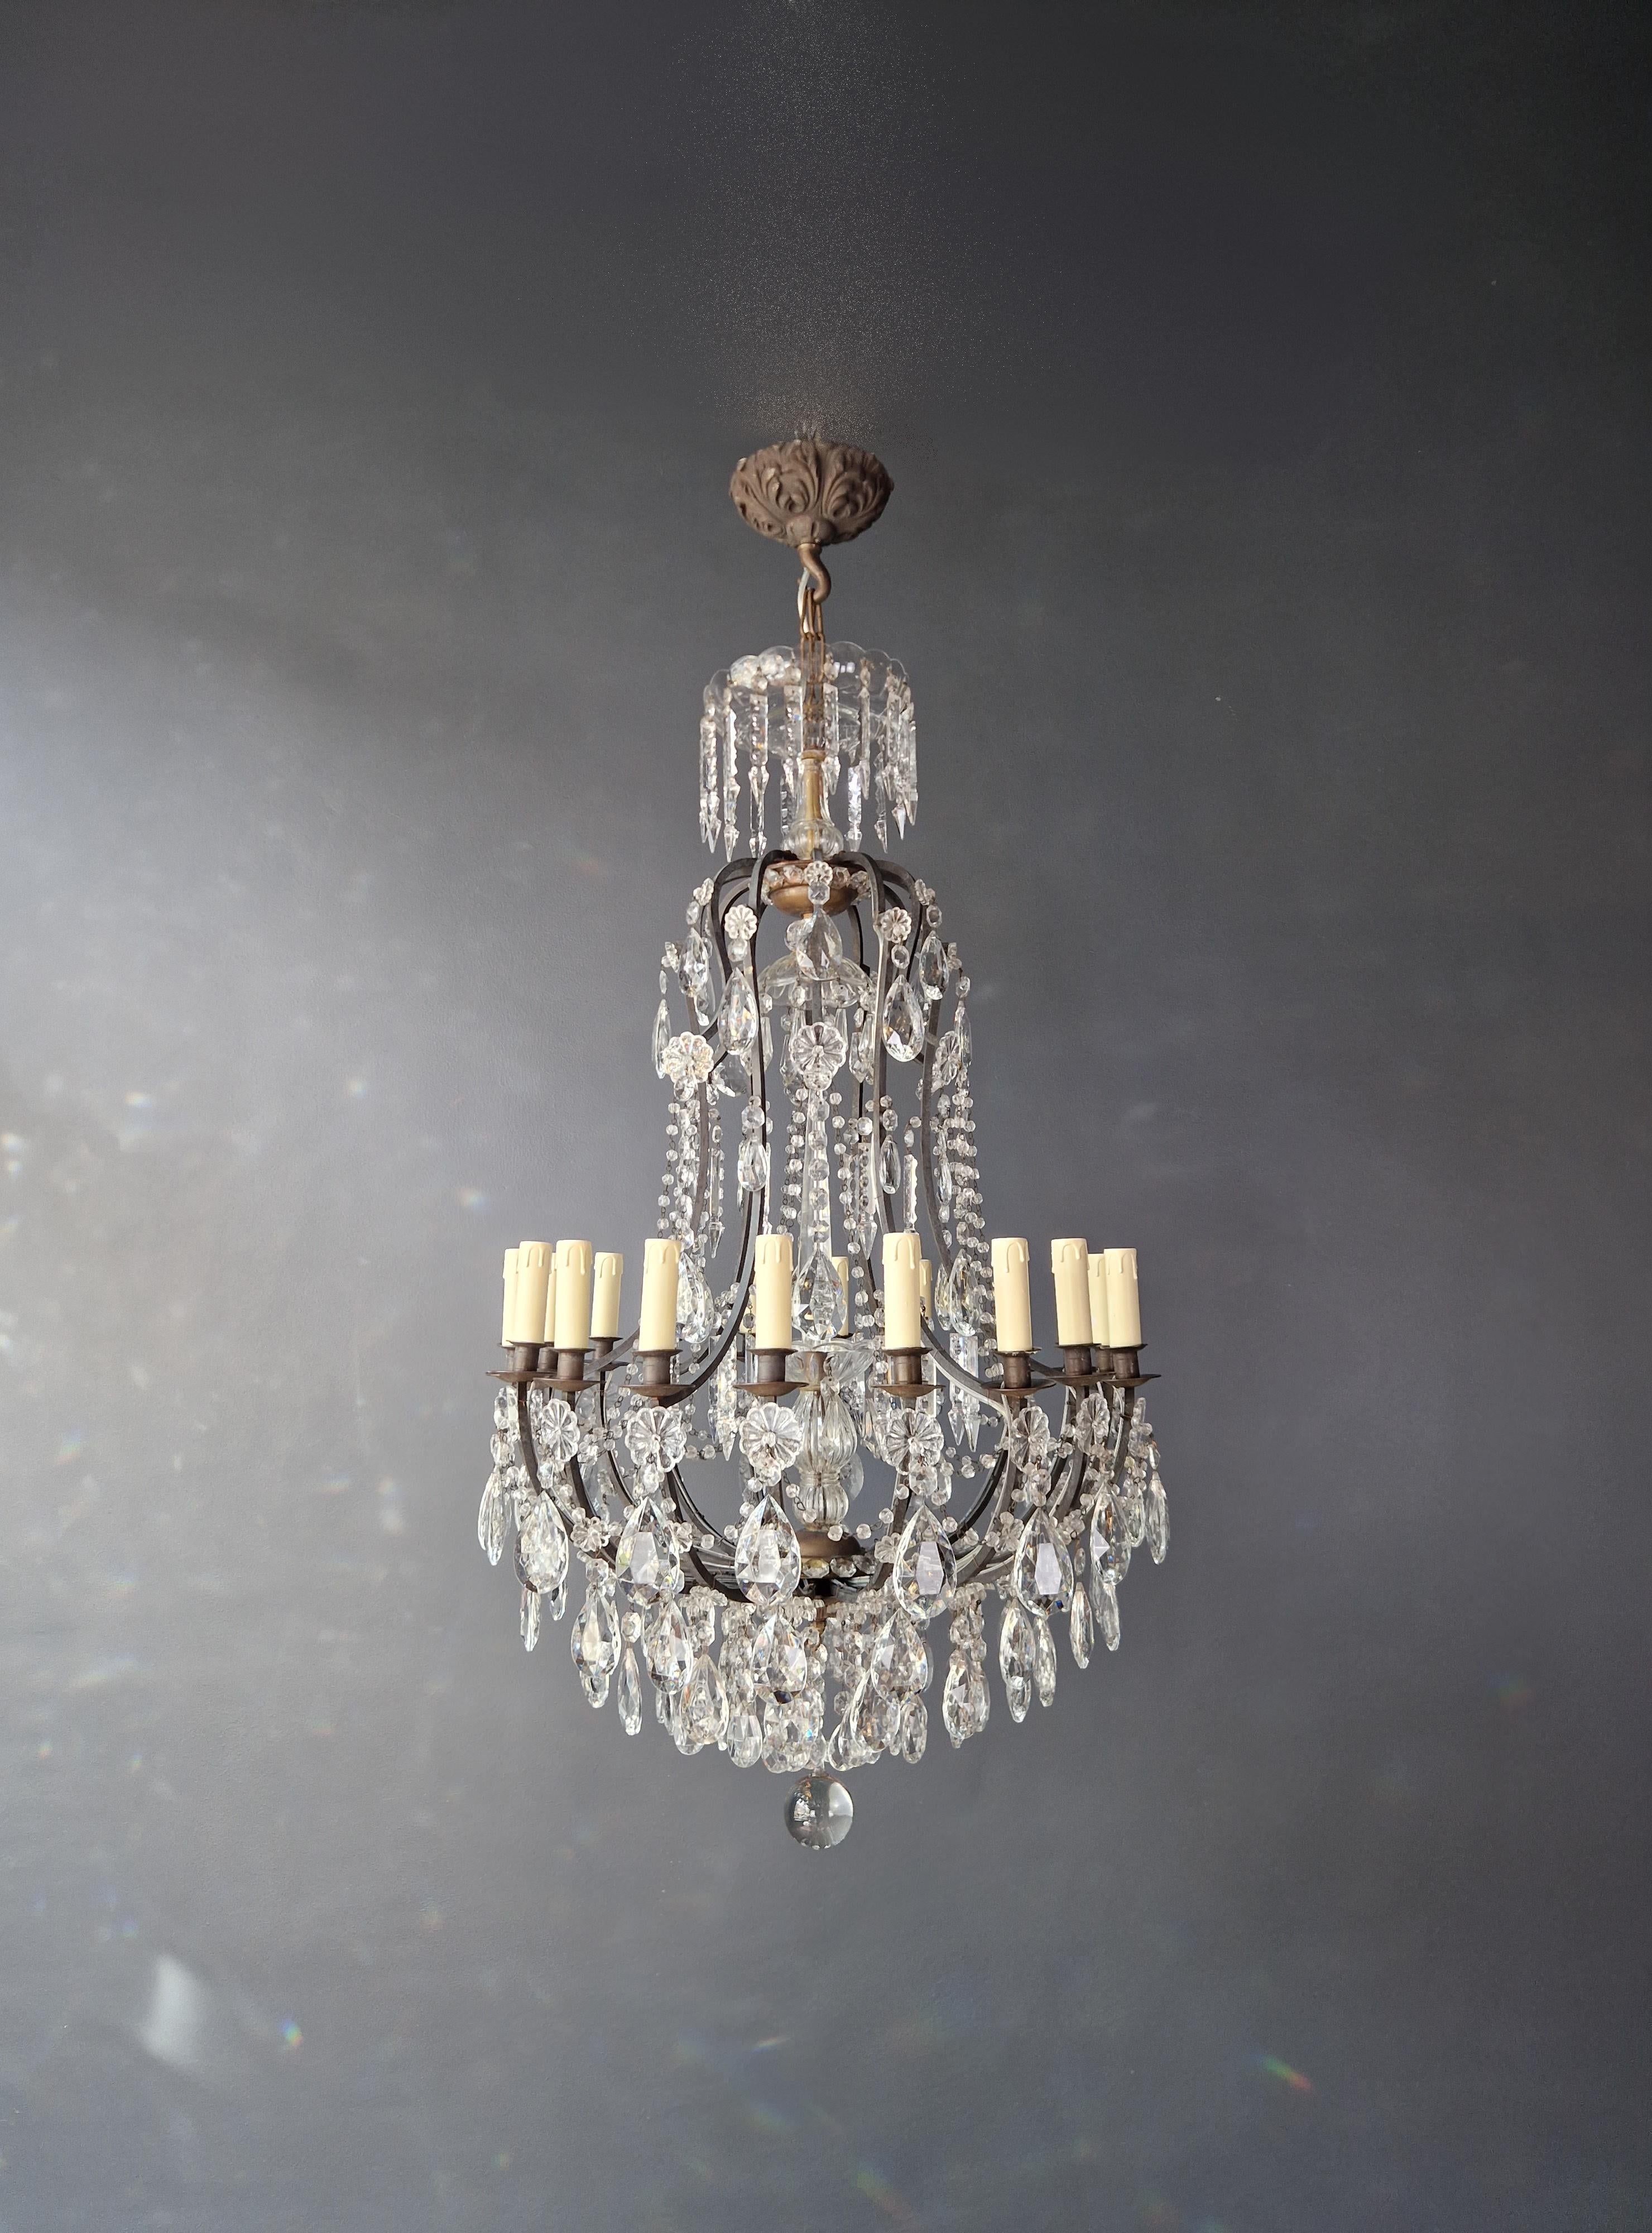 Introducing our cherished old chandelier, lovingly and professionally restored in Berlin! Its electrical wiring works seamlessly in the US, as it has been expertly re-wired and is ready to be hung. Not a single crystal is missing, as the cabling has